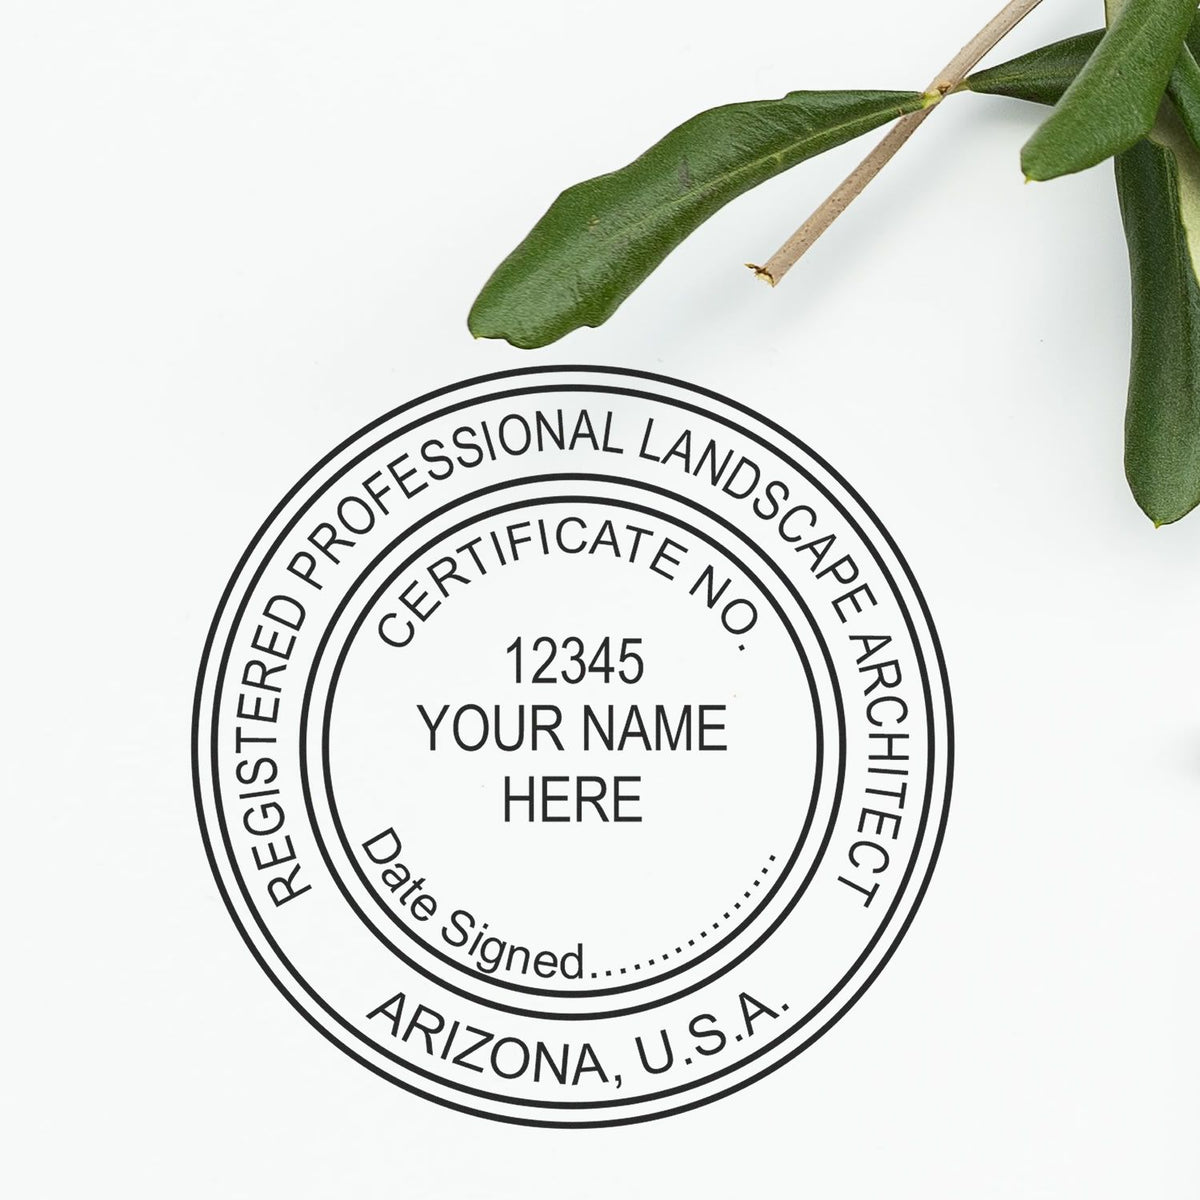 A stamped impression of the Digital Arizona Landscape Architect Stamp in this stylish lifestyle photo, setting the tone for a unique and personalized product.